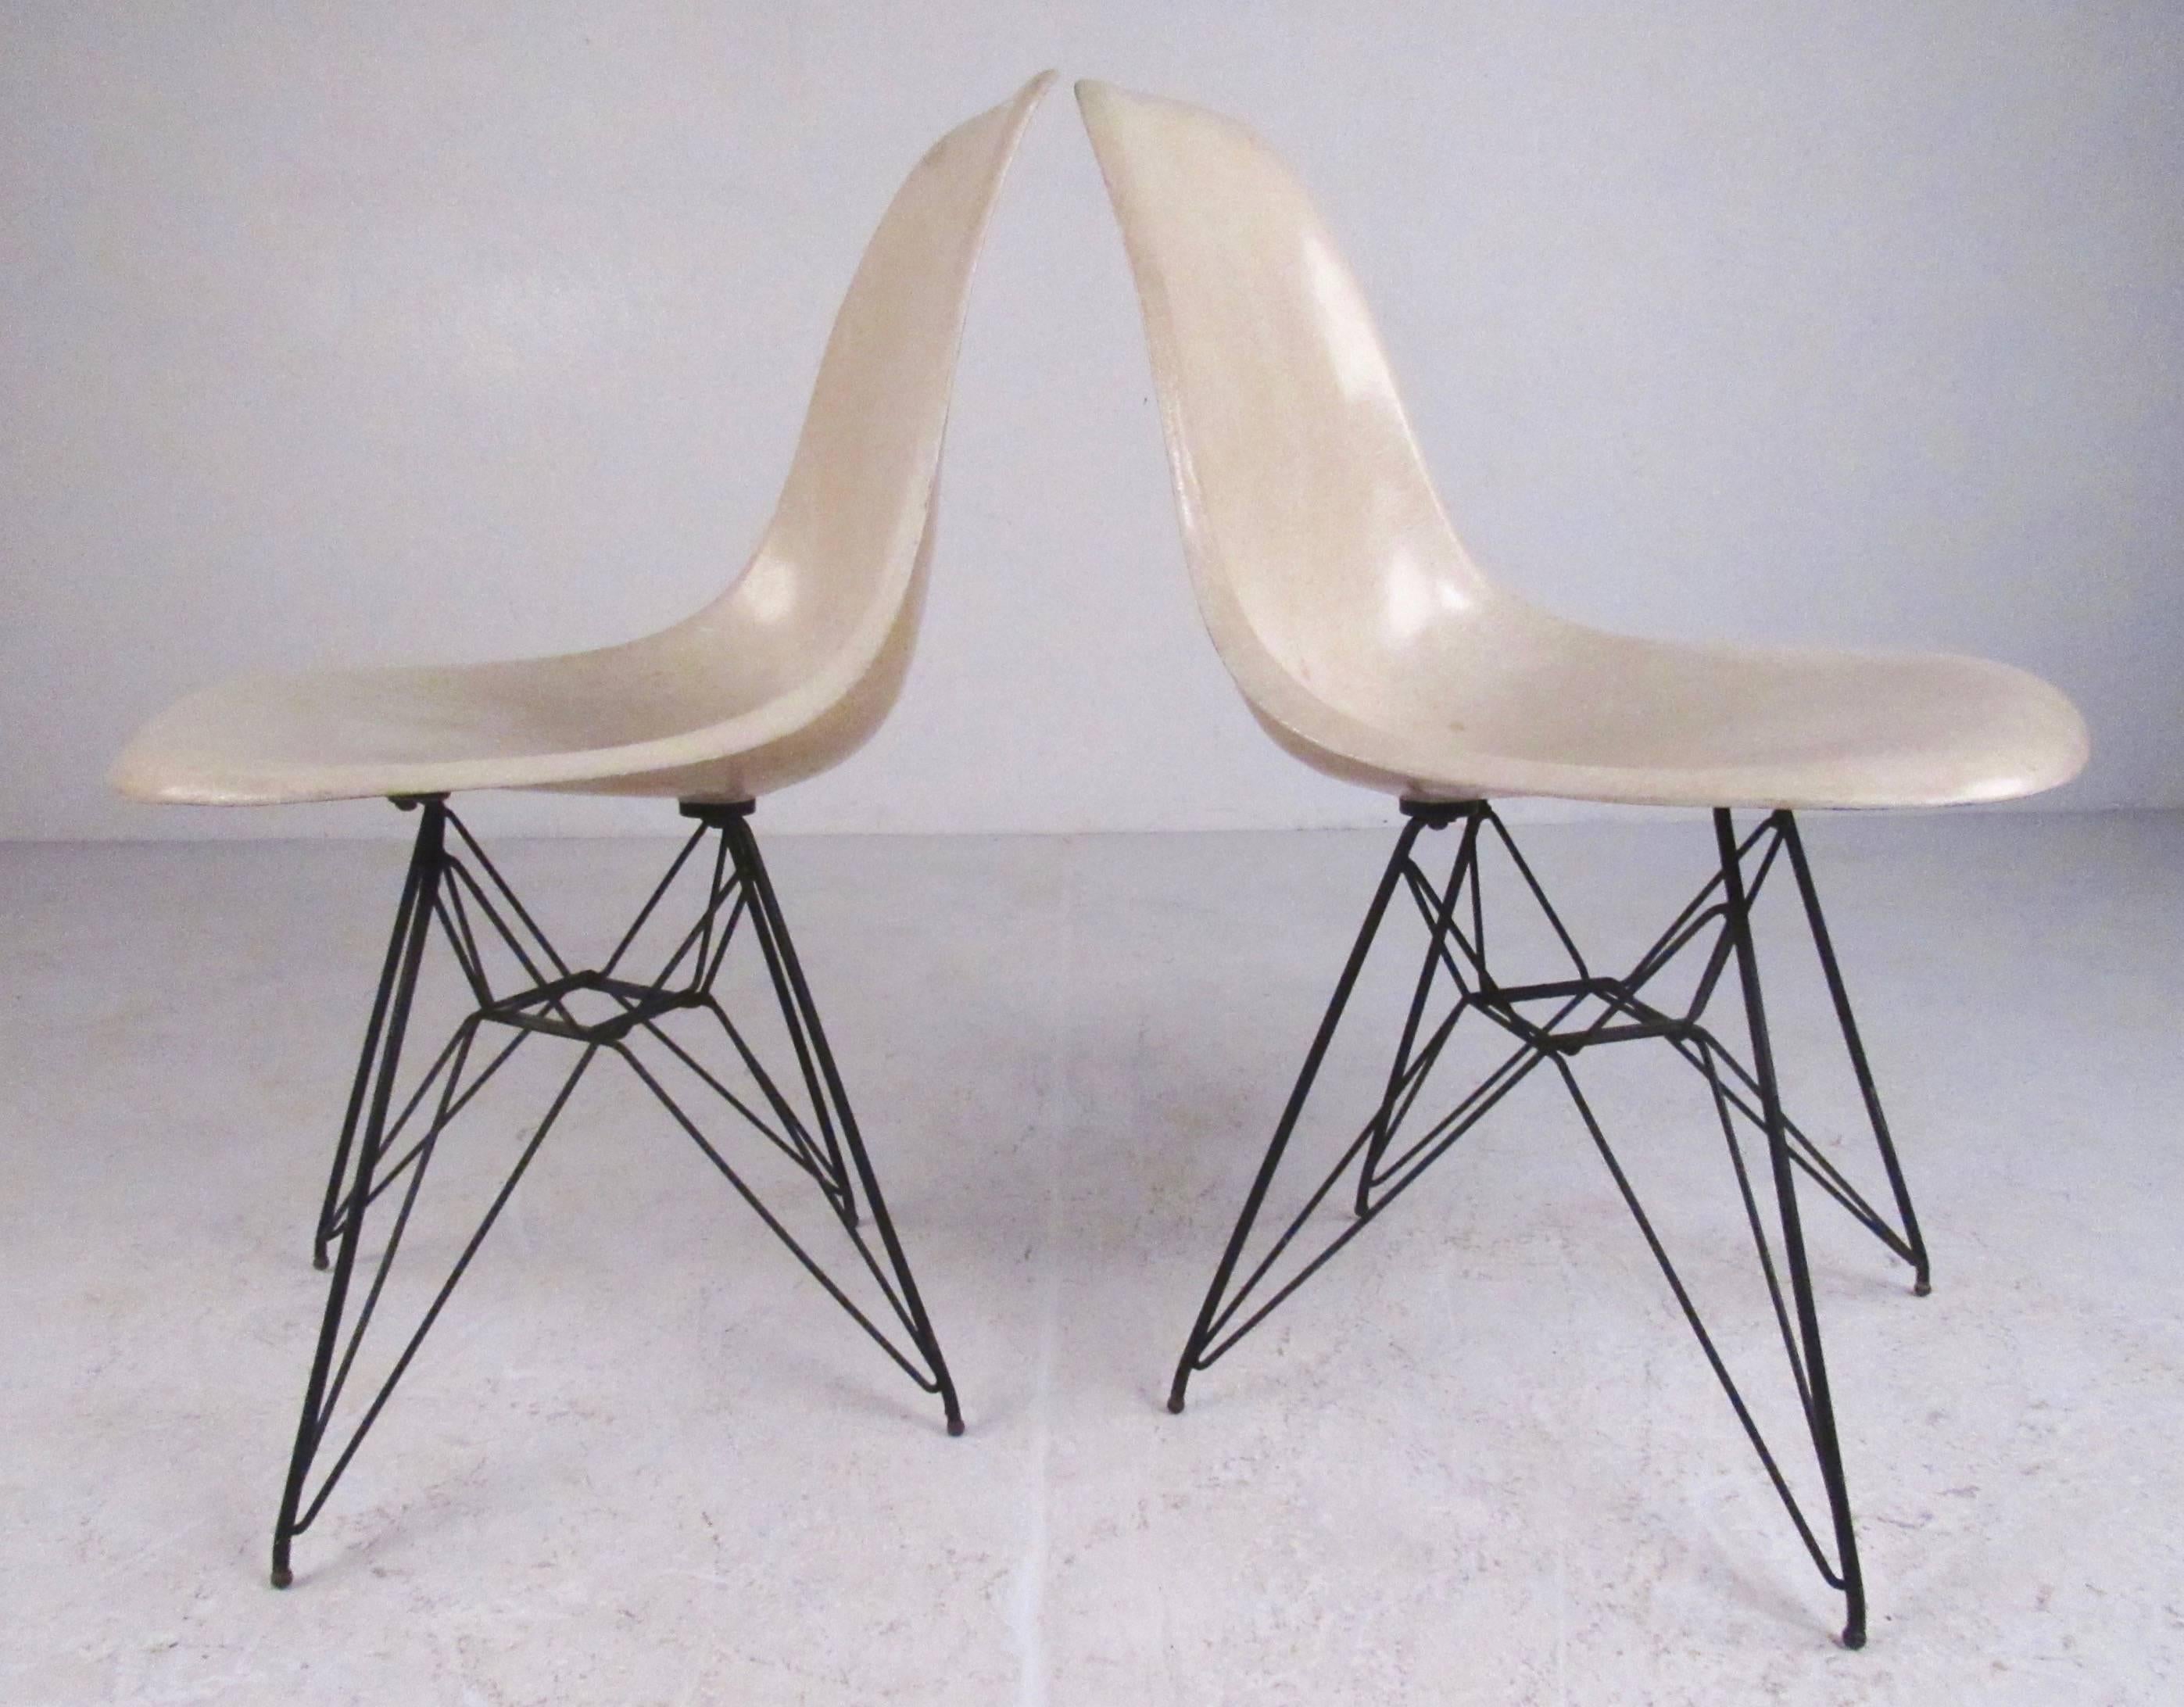 This iconic pair of Mid-Century Modern side chairs feature the Classic Charles Eames Eiffel Tower base and molded fiberglass seats. Stylish vintage modern comfort makes this matching pair the perfect addition to home or business seating, original